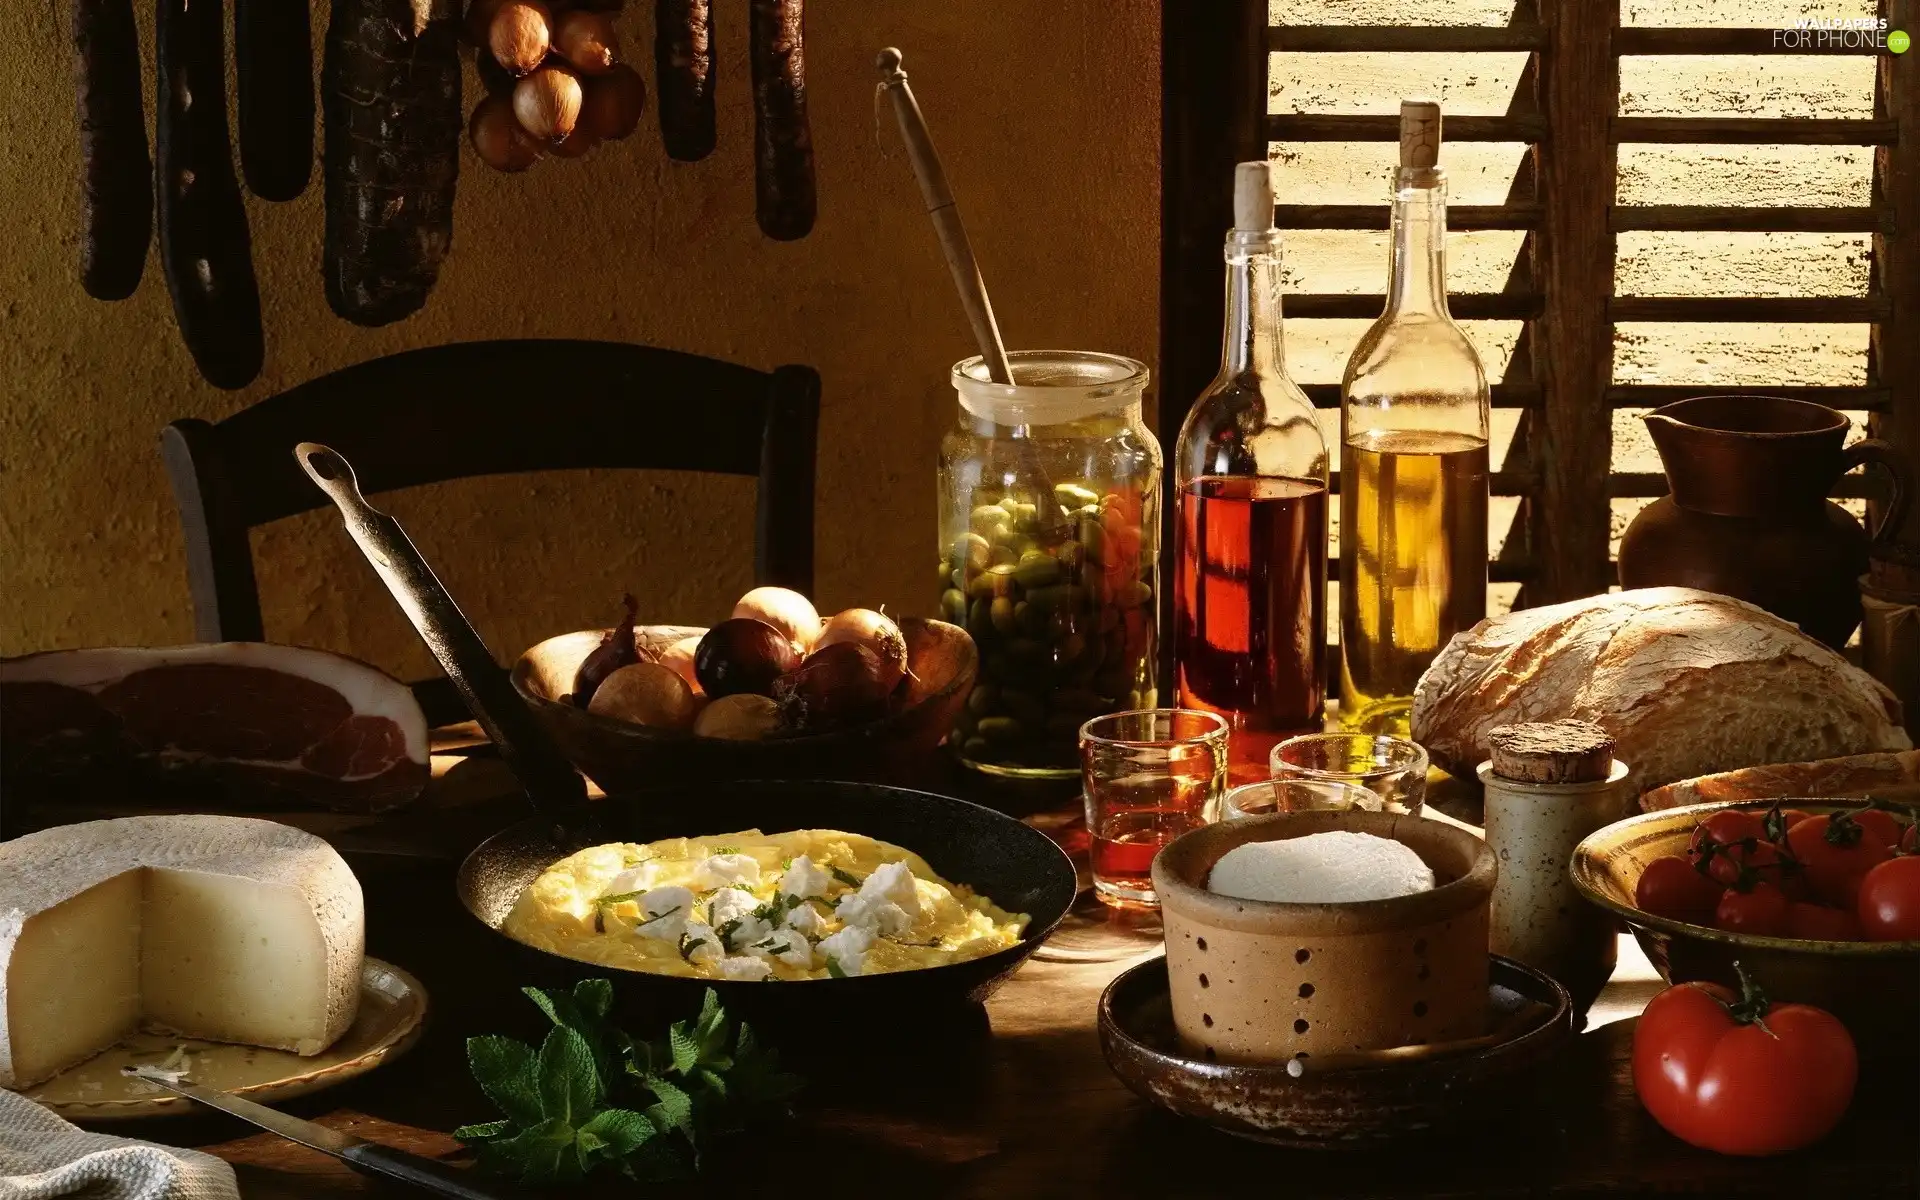 vegetables, Scrambled Eggs, oil, cooking, bread, cheese